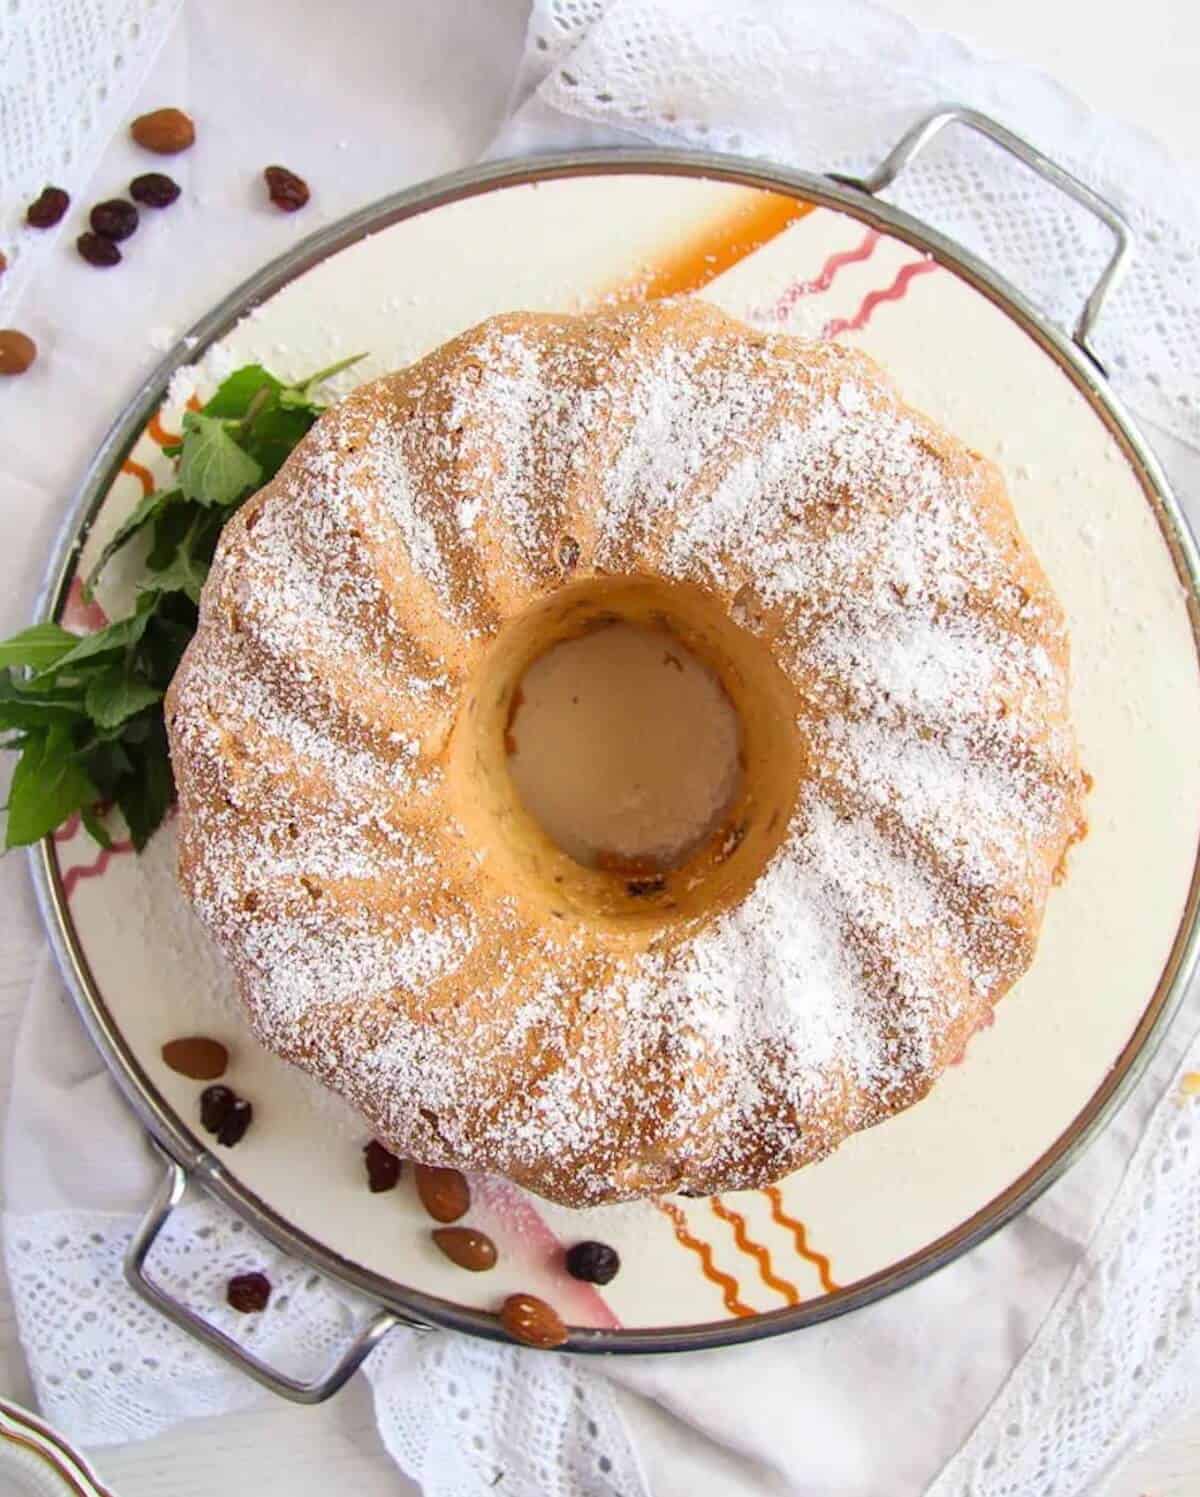 An almond bundt cake on a cake stand, dusted with icing sugar.